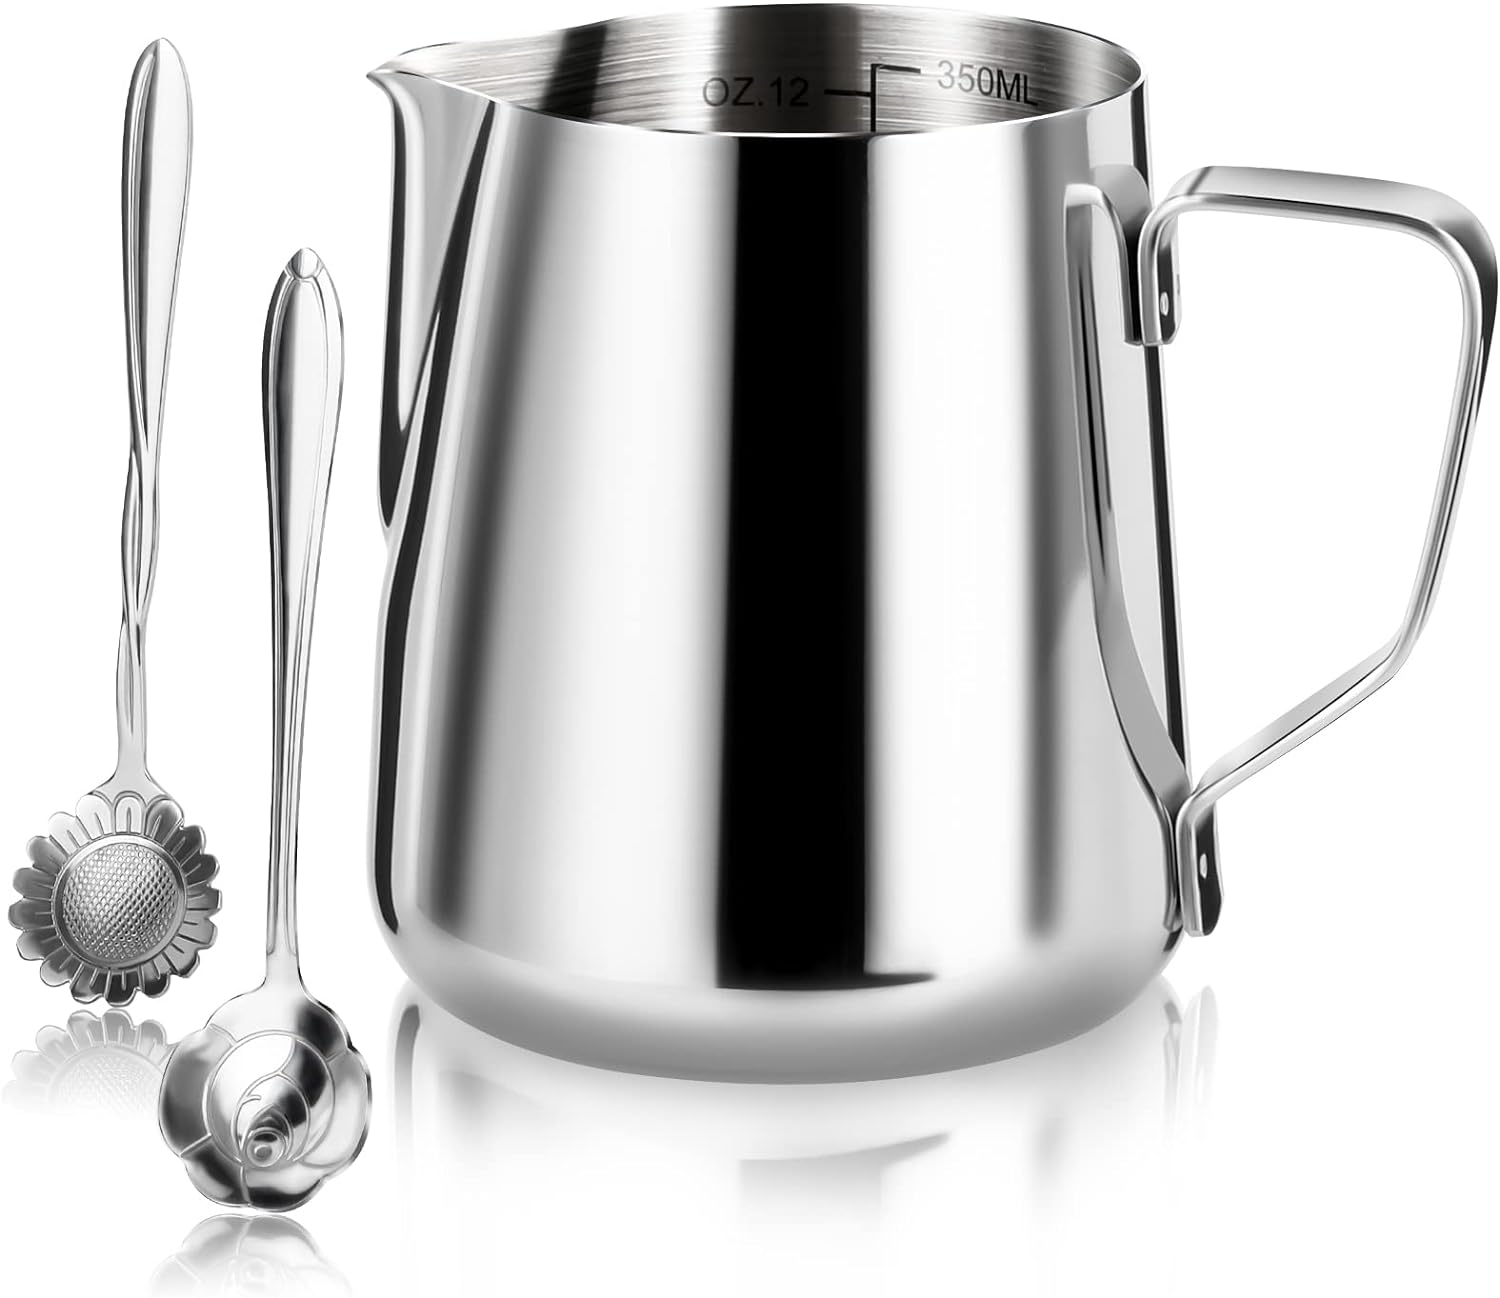 Milk Frothing Pitcher, Espresso Steaming Pitcher 12oz, Espresso Machine Accessories, Stainless Steel Milk Coffee Cappuccino Barista Steam Pitchers Milk Jug Cup with Spoons